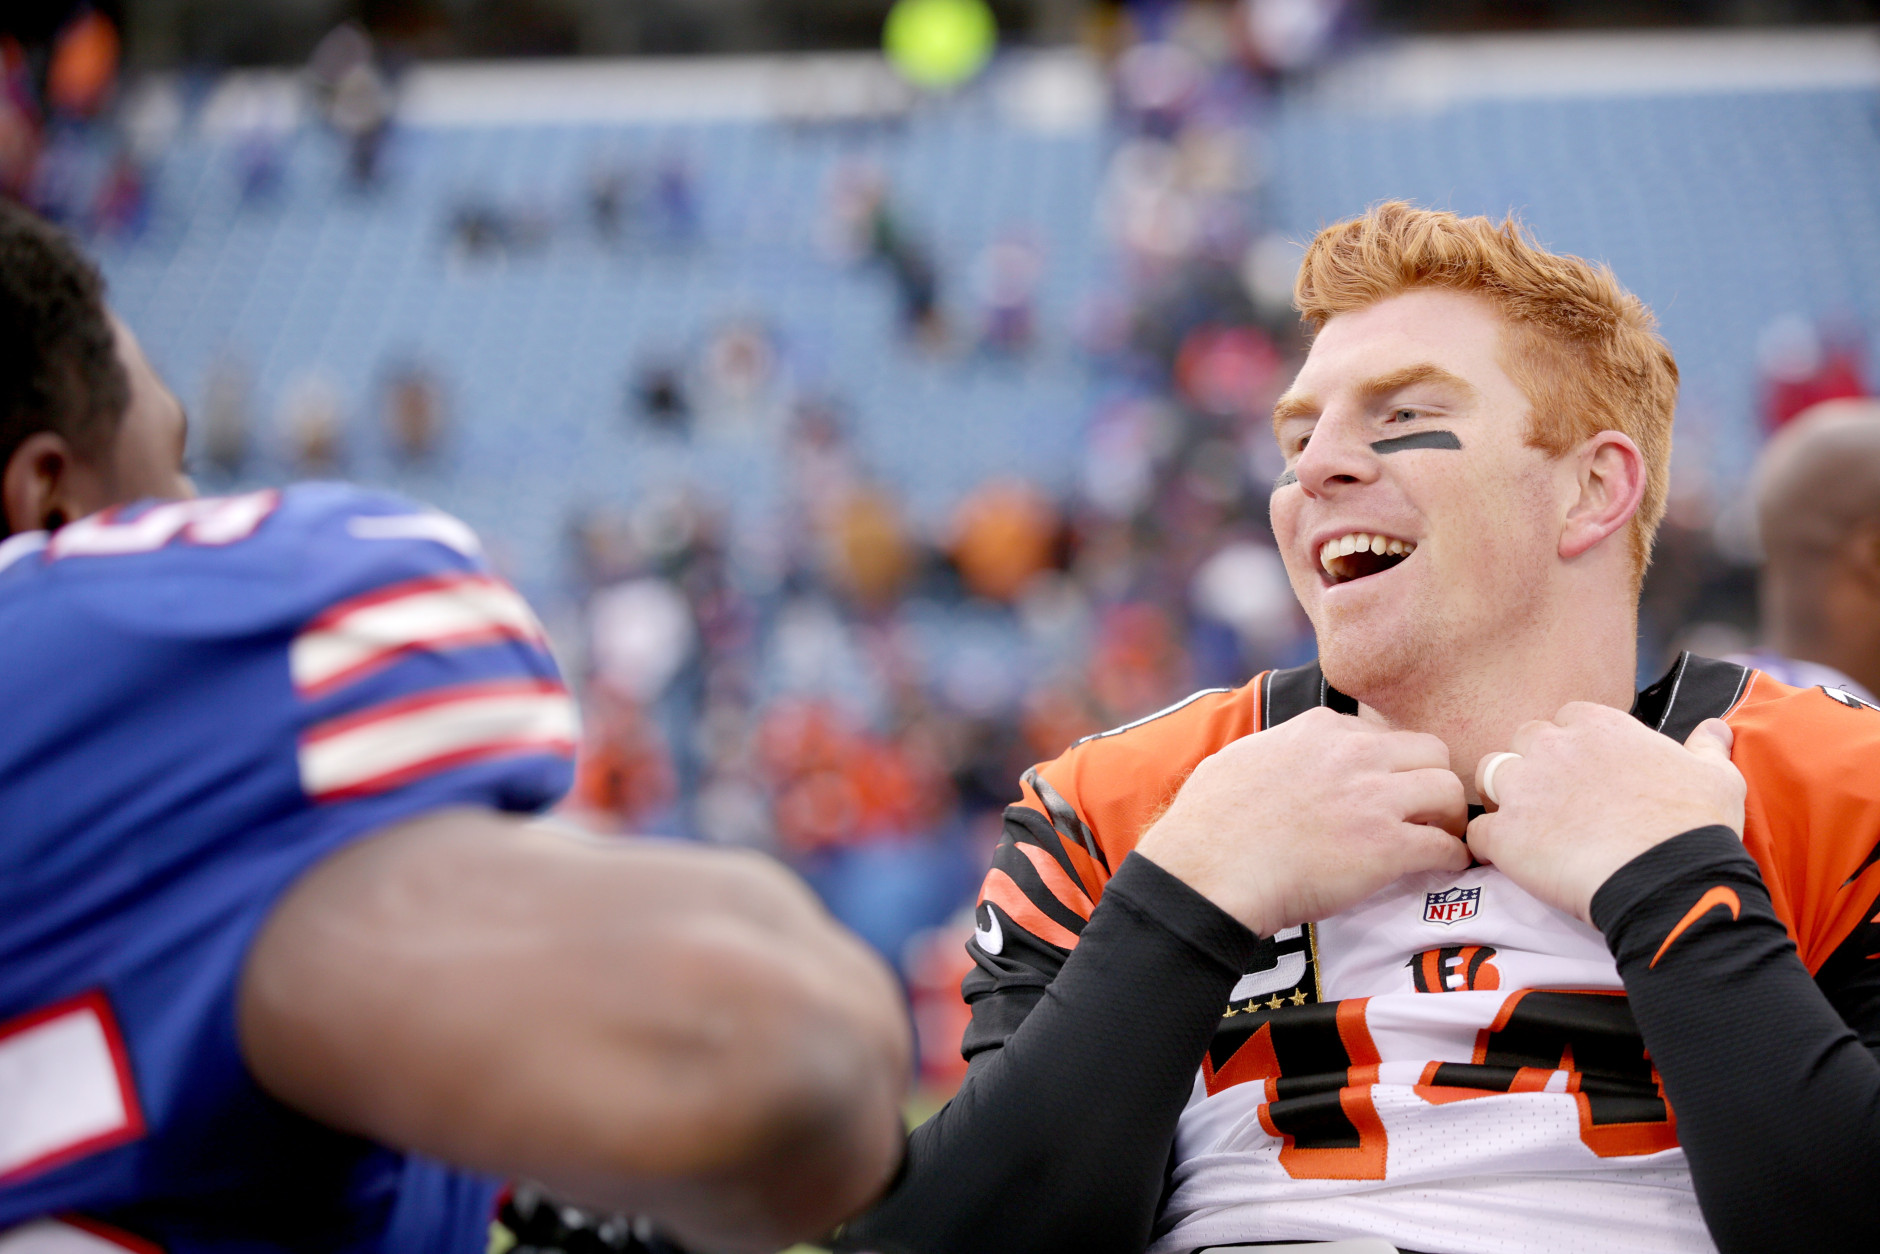 ORCHARD PARK, NY - OCTOBER 18:   Andy Dalton #14 of the Cincinnati Bengals exchanges jerseys with Jerry Hughes #55 of the Buffalo Bills after the game at Ralph Wilson Stadium on October 18, 2015 in Orchard Park, New York.  (Photo by Brett Carlsen/Getty Images)